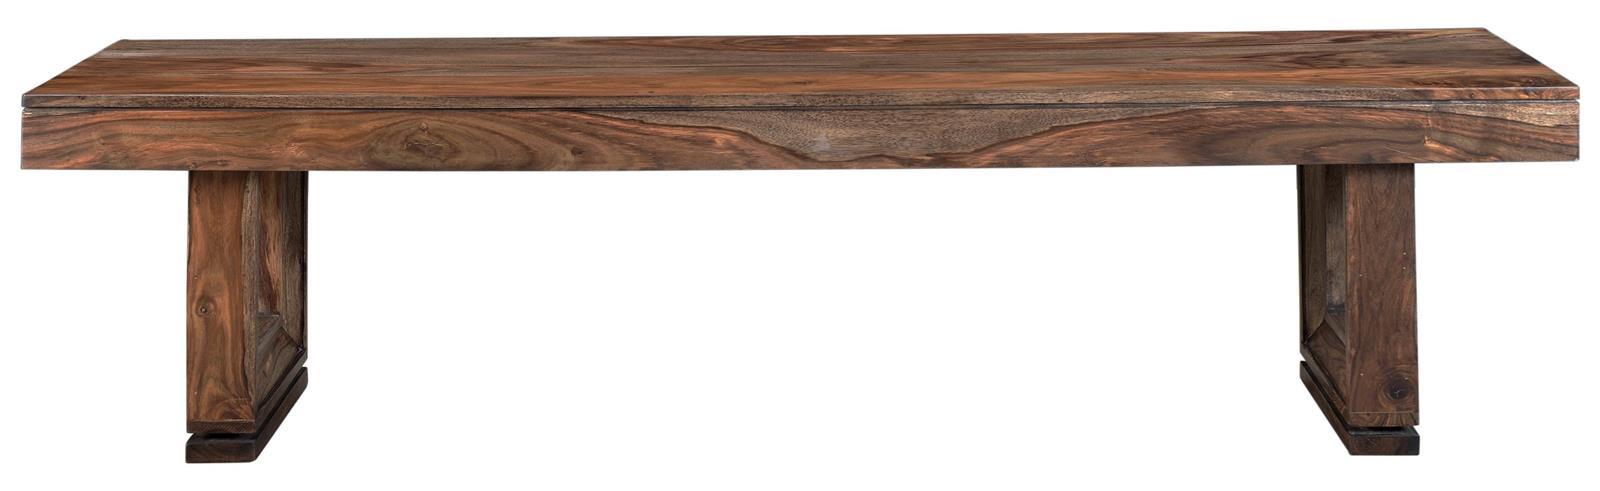 Coast to Coast Brownstone Dining Bench in Nut Brown